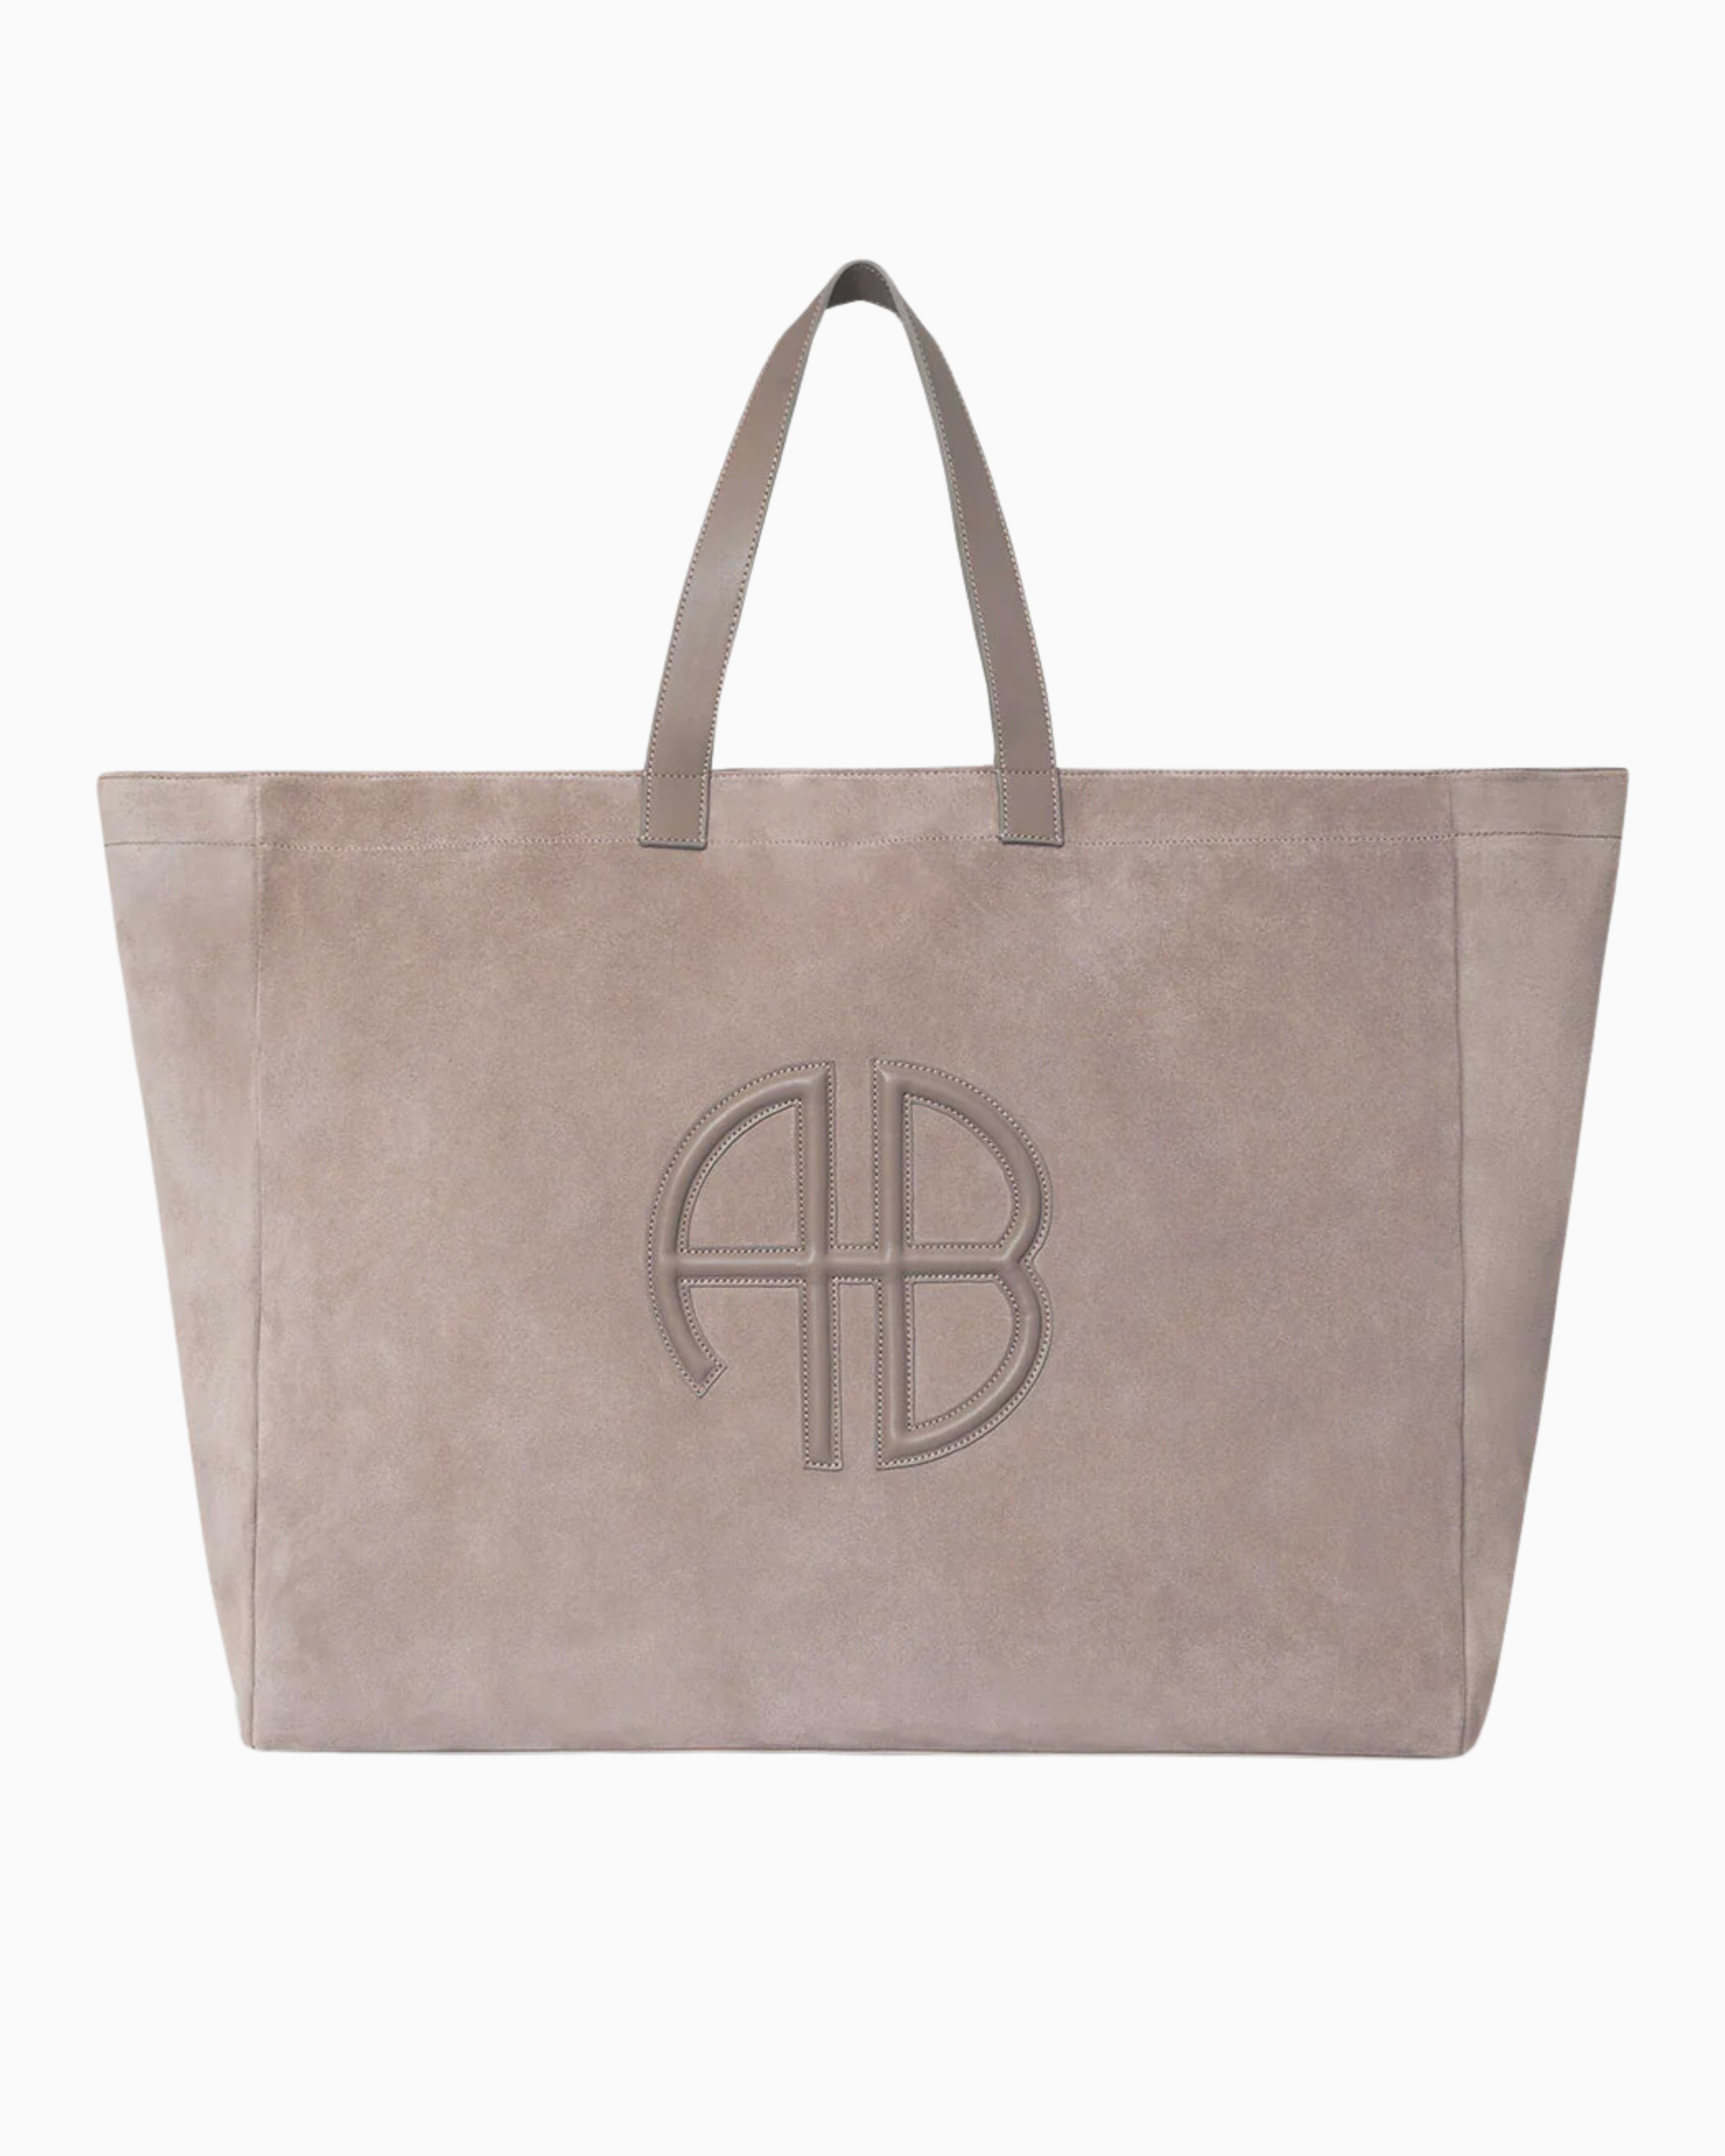 Anine Bing XL Rio Tote in Taupe Suede